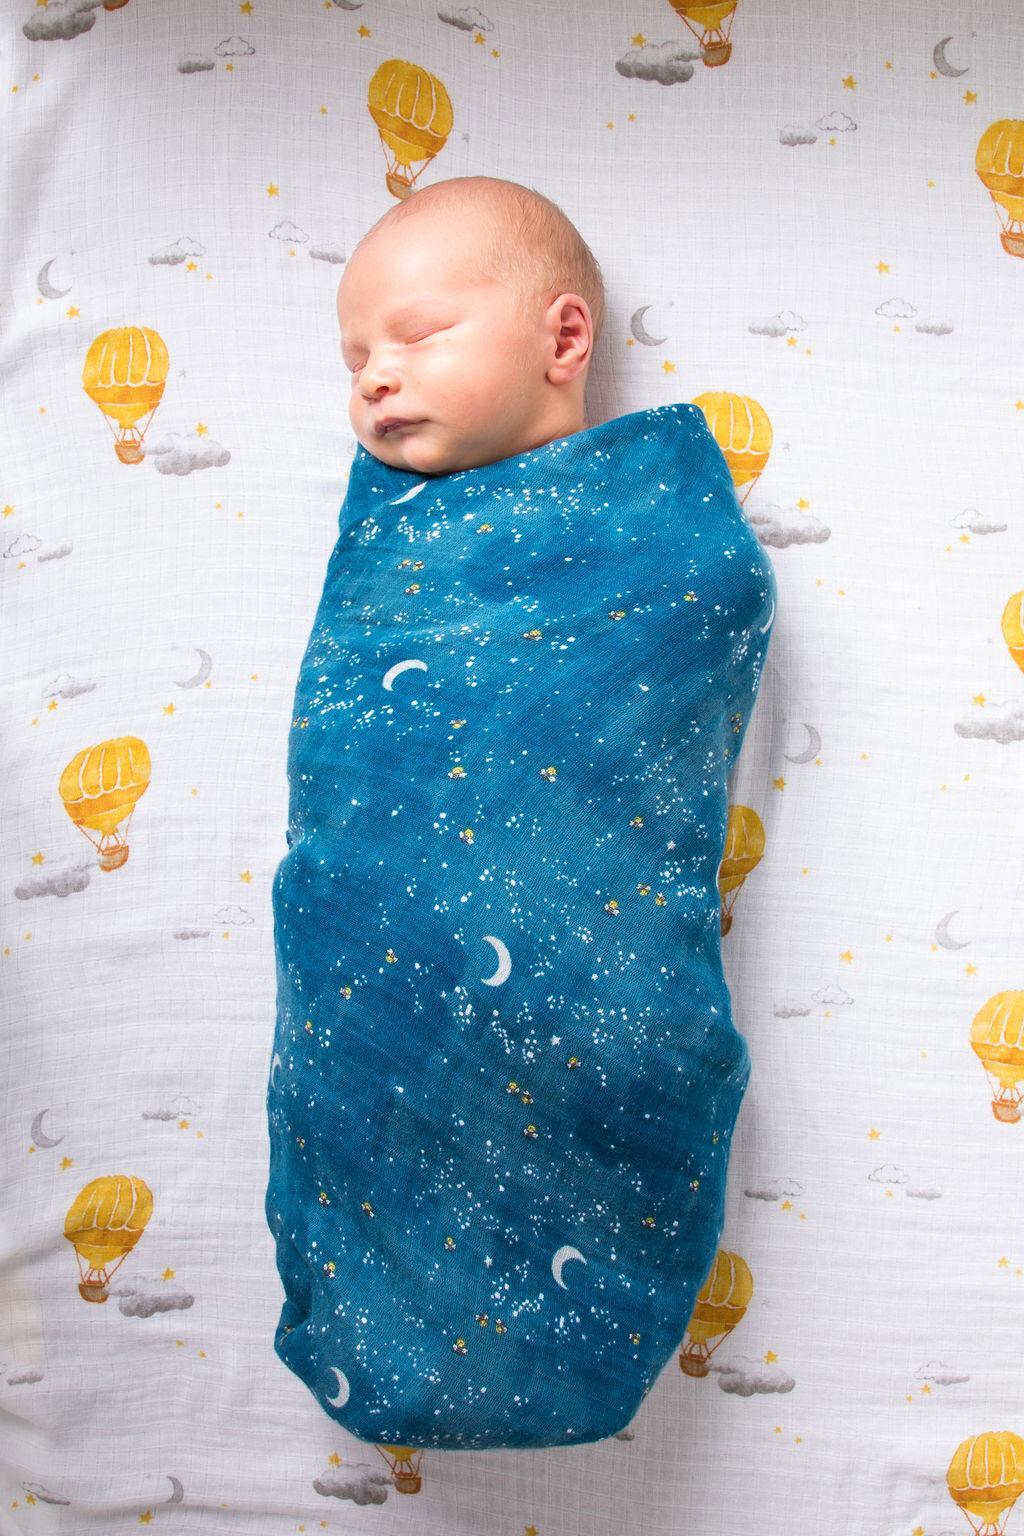 ORGANIC SWADDLE SET - FLY ME to the MOON (Starry Night + Hot Air Balloon) - Why and Whale